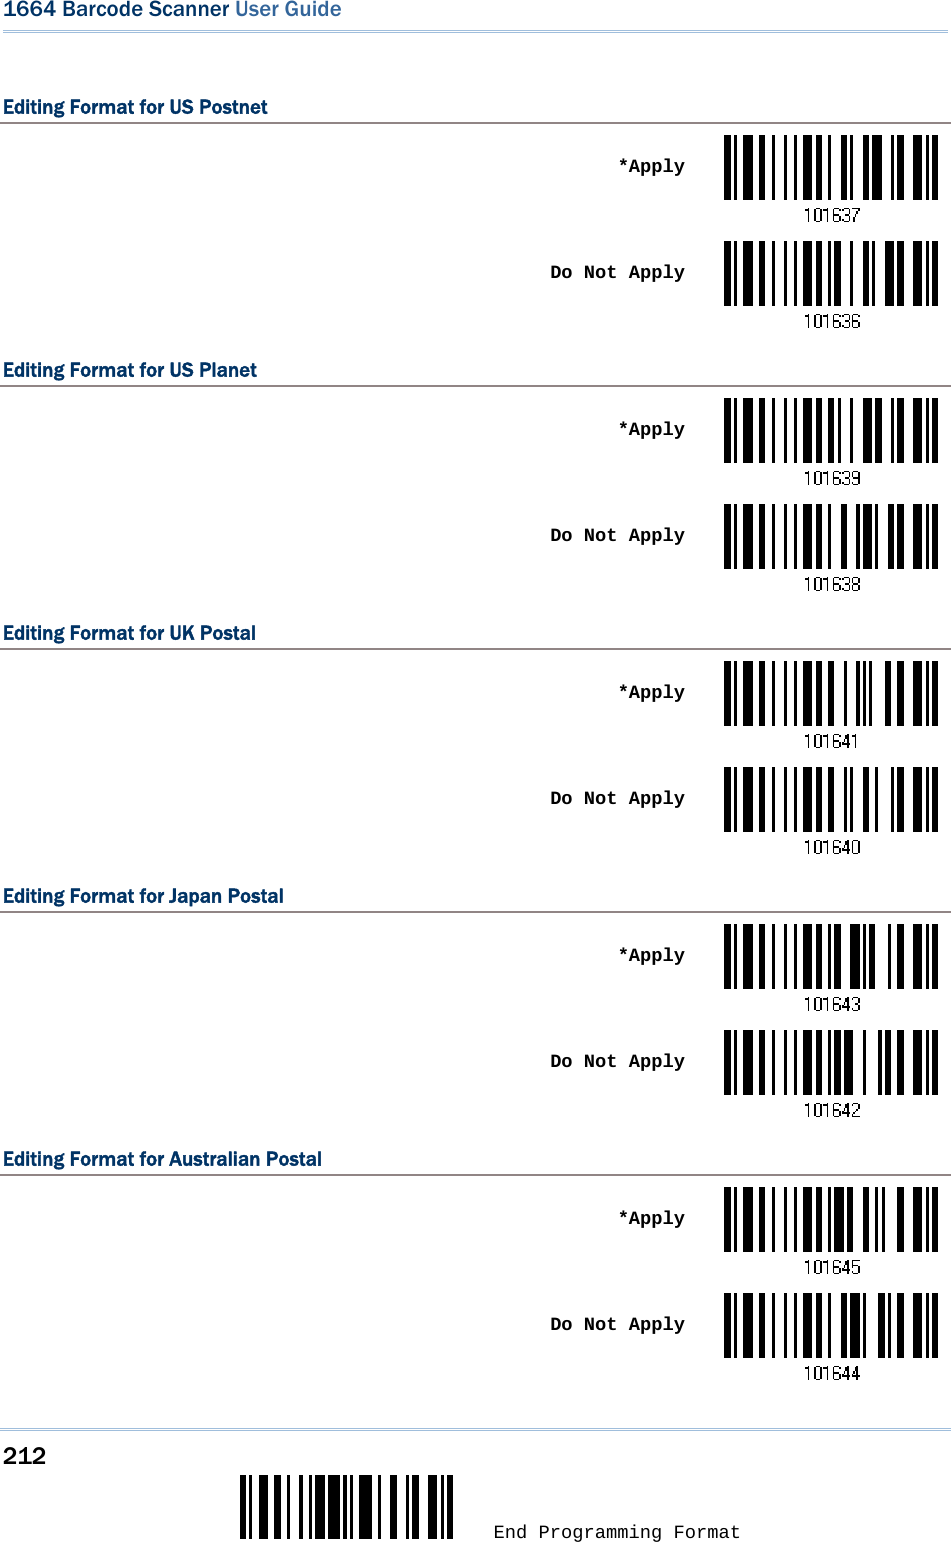 212  End Programming Format 1664 Barcode Scanner User Guide  Editing Format for US Postnet  *Apply Do Not ApplyEditing Format for US Planet  *Apply Do Not ApplyEditing Format for UK Postal  *Apply Do Not ApplyEditing Format for Japan Postal  *Apply Do Not ApplyEditing Format for Australian Postal  *Apply Do Not Apply